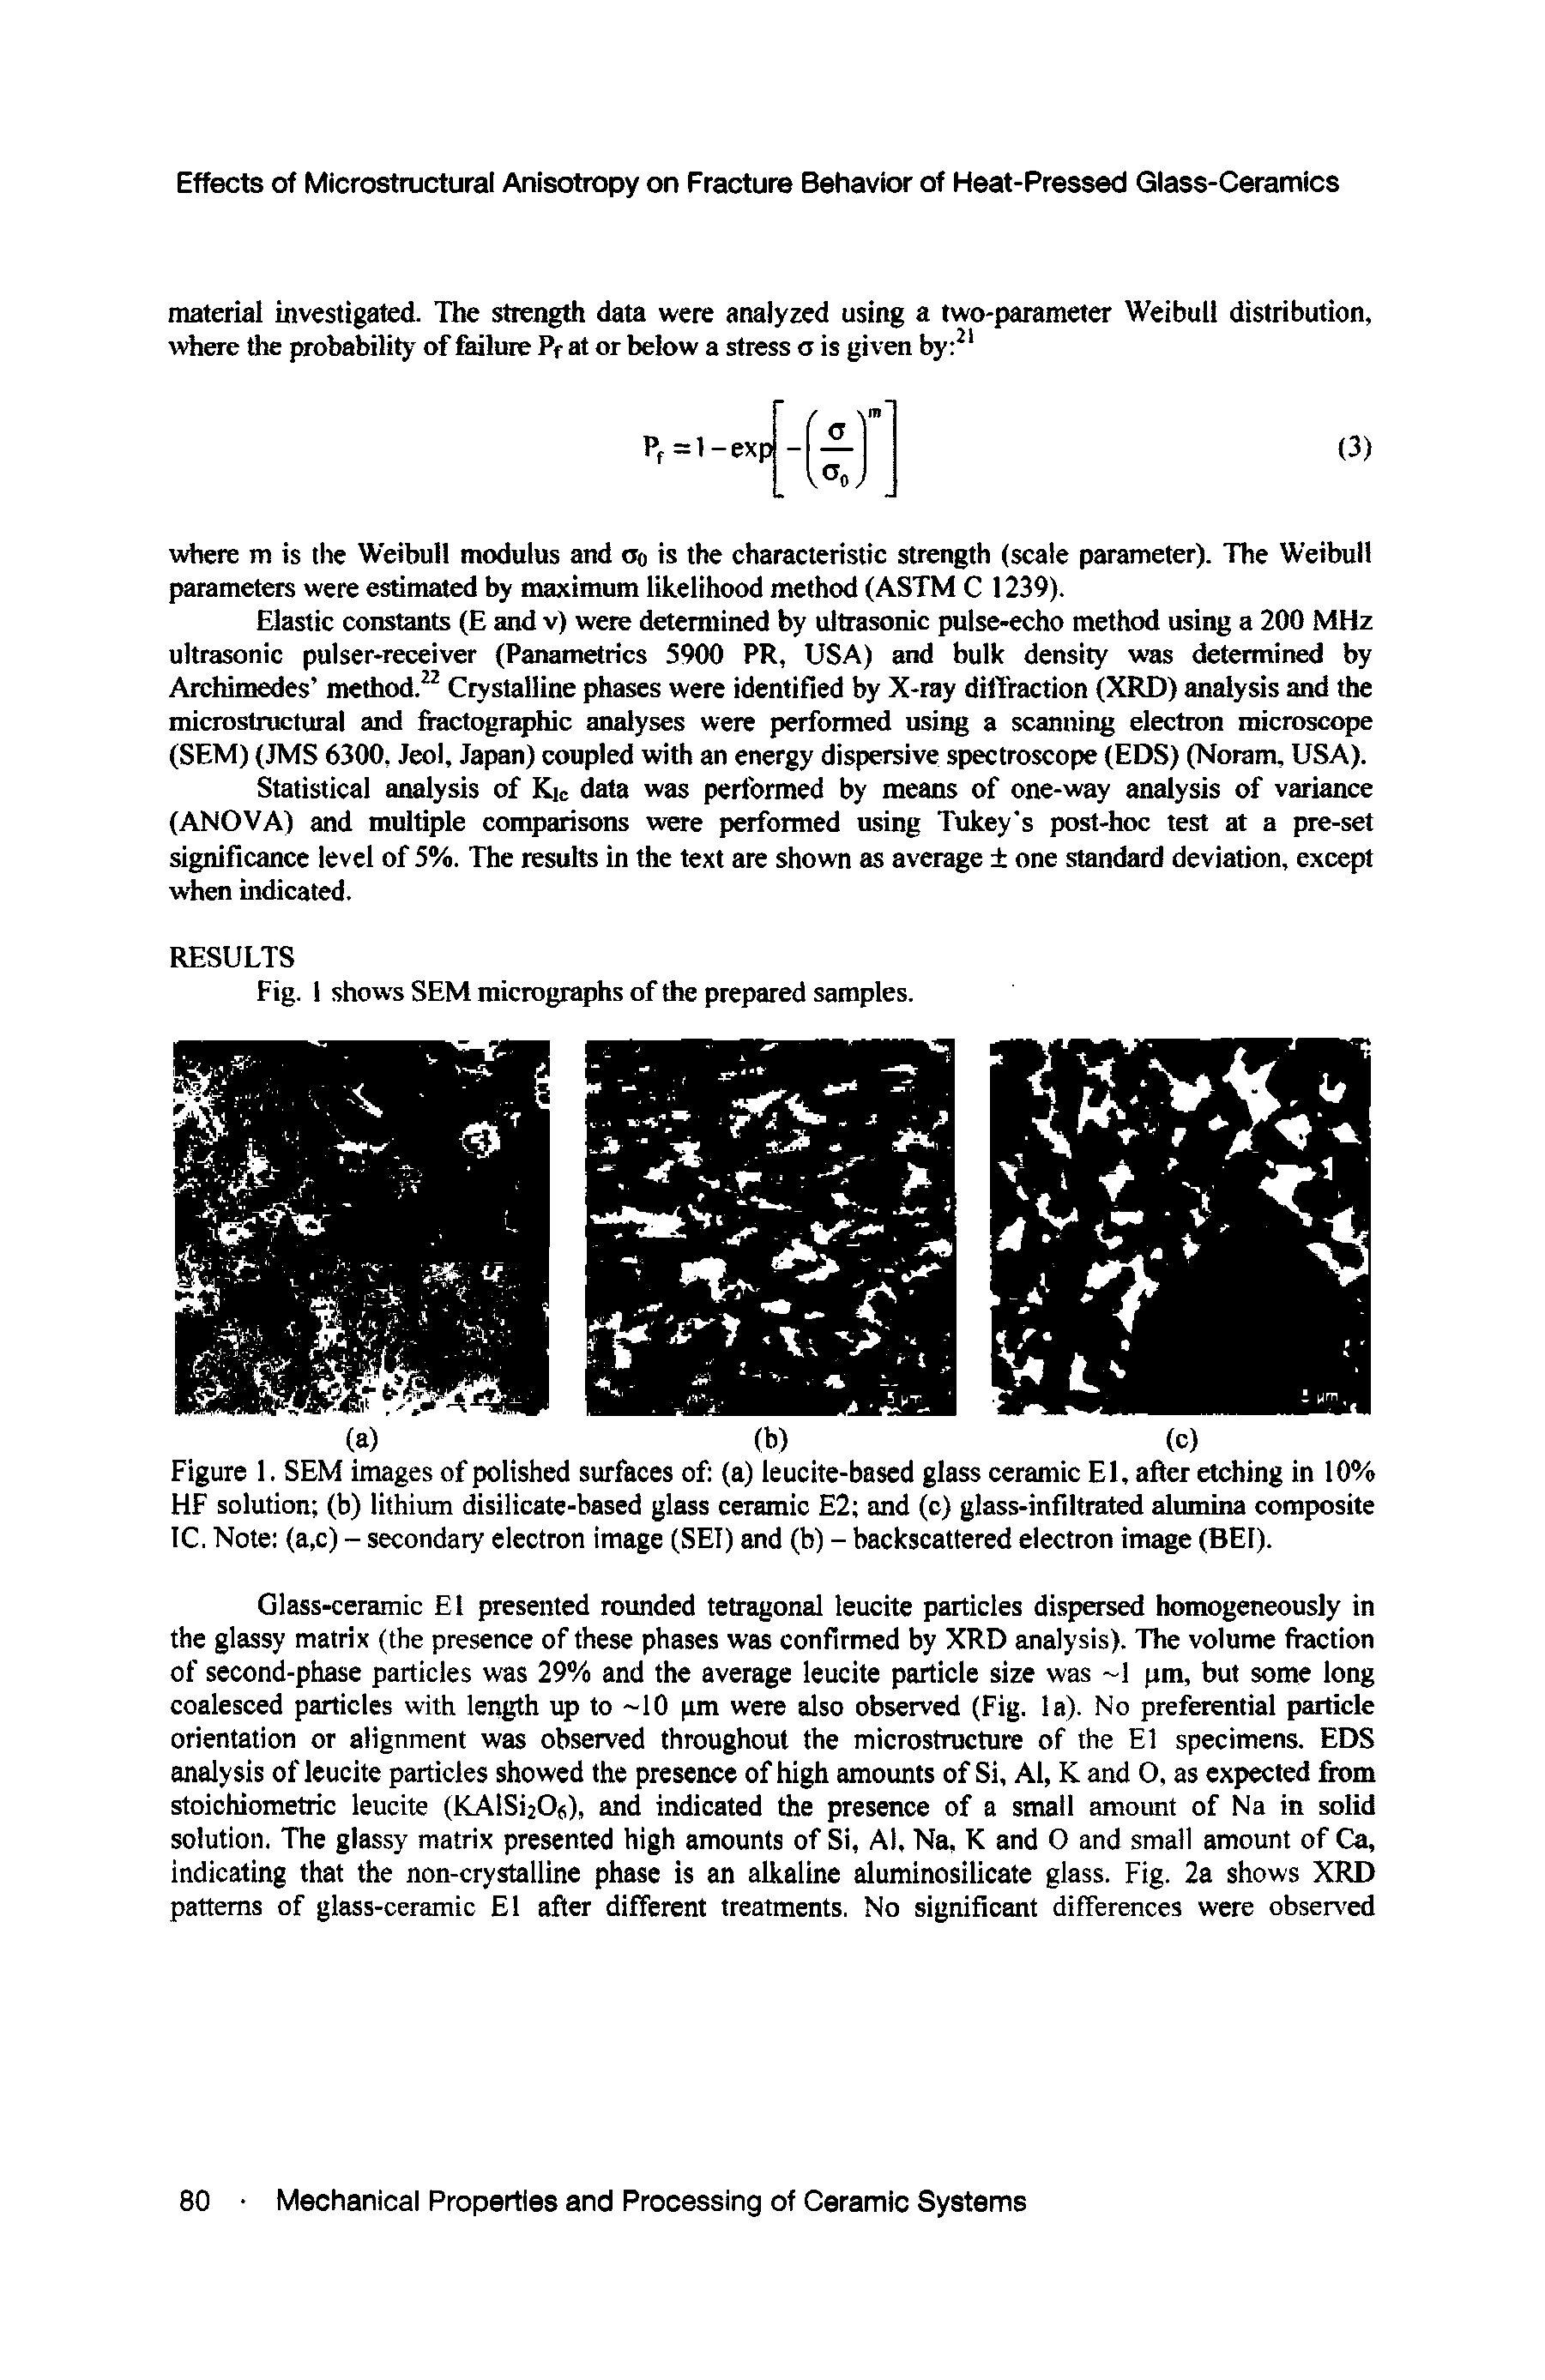 Figure 1. SEM Images of polished surfaces ofi (a) leucite-based glass ceramic El, after etching in 10% HF solution (b) lithium disilicate-based glass ceramic E2 and (c) glass-infiltrated alumina composite IC. Note (a,c) - secondary electron image (SET) and (b) - backscattered electron im e (BEF).